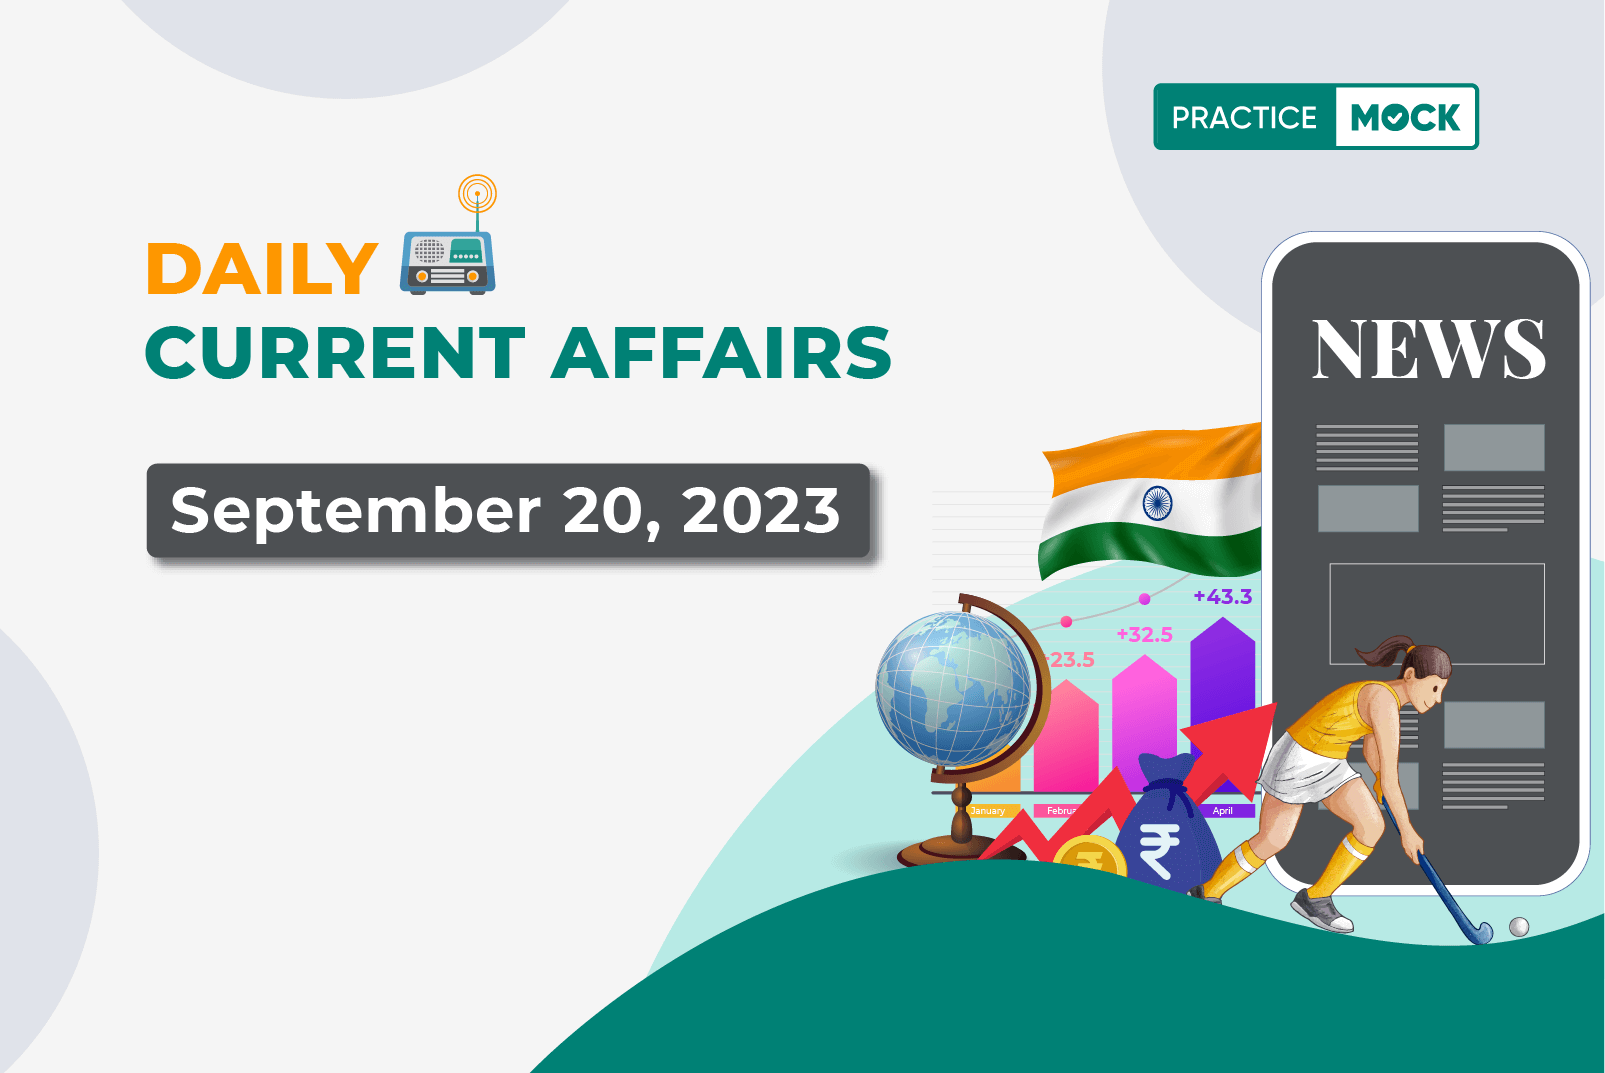 Daily Current Affairs- September 20, 2023